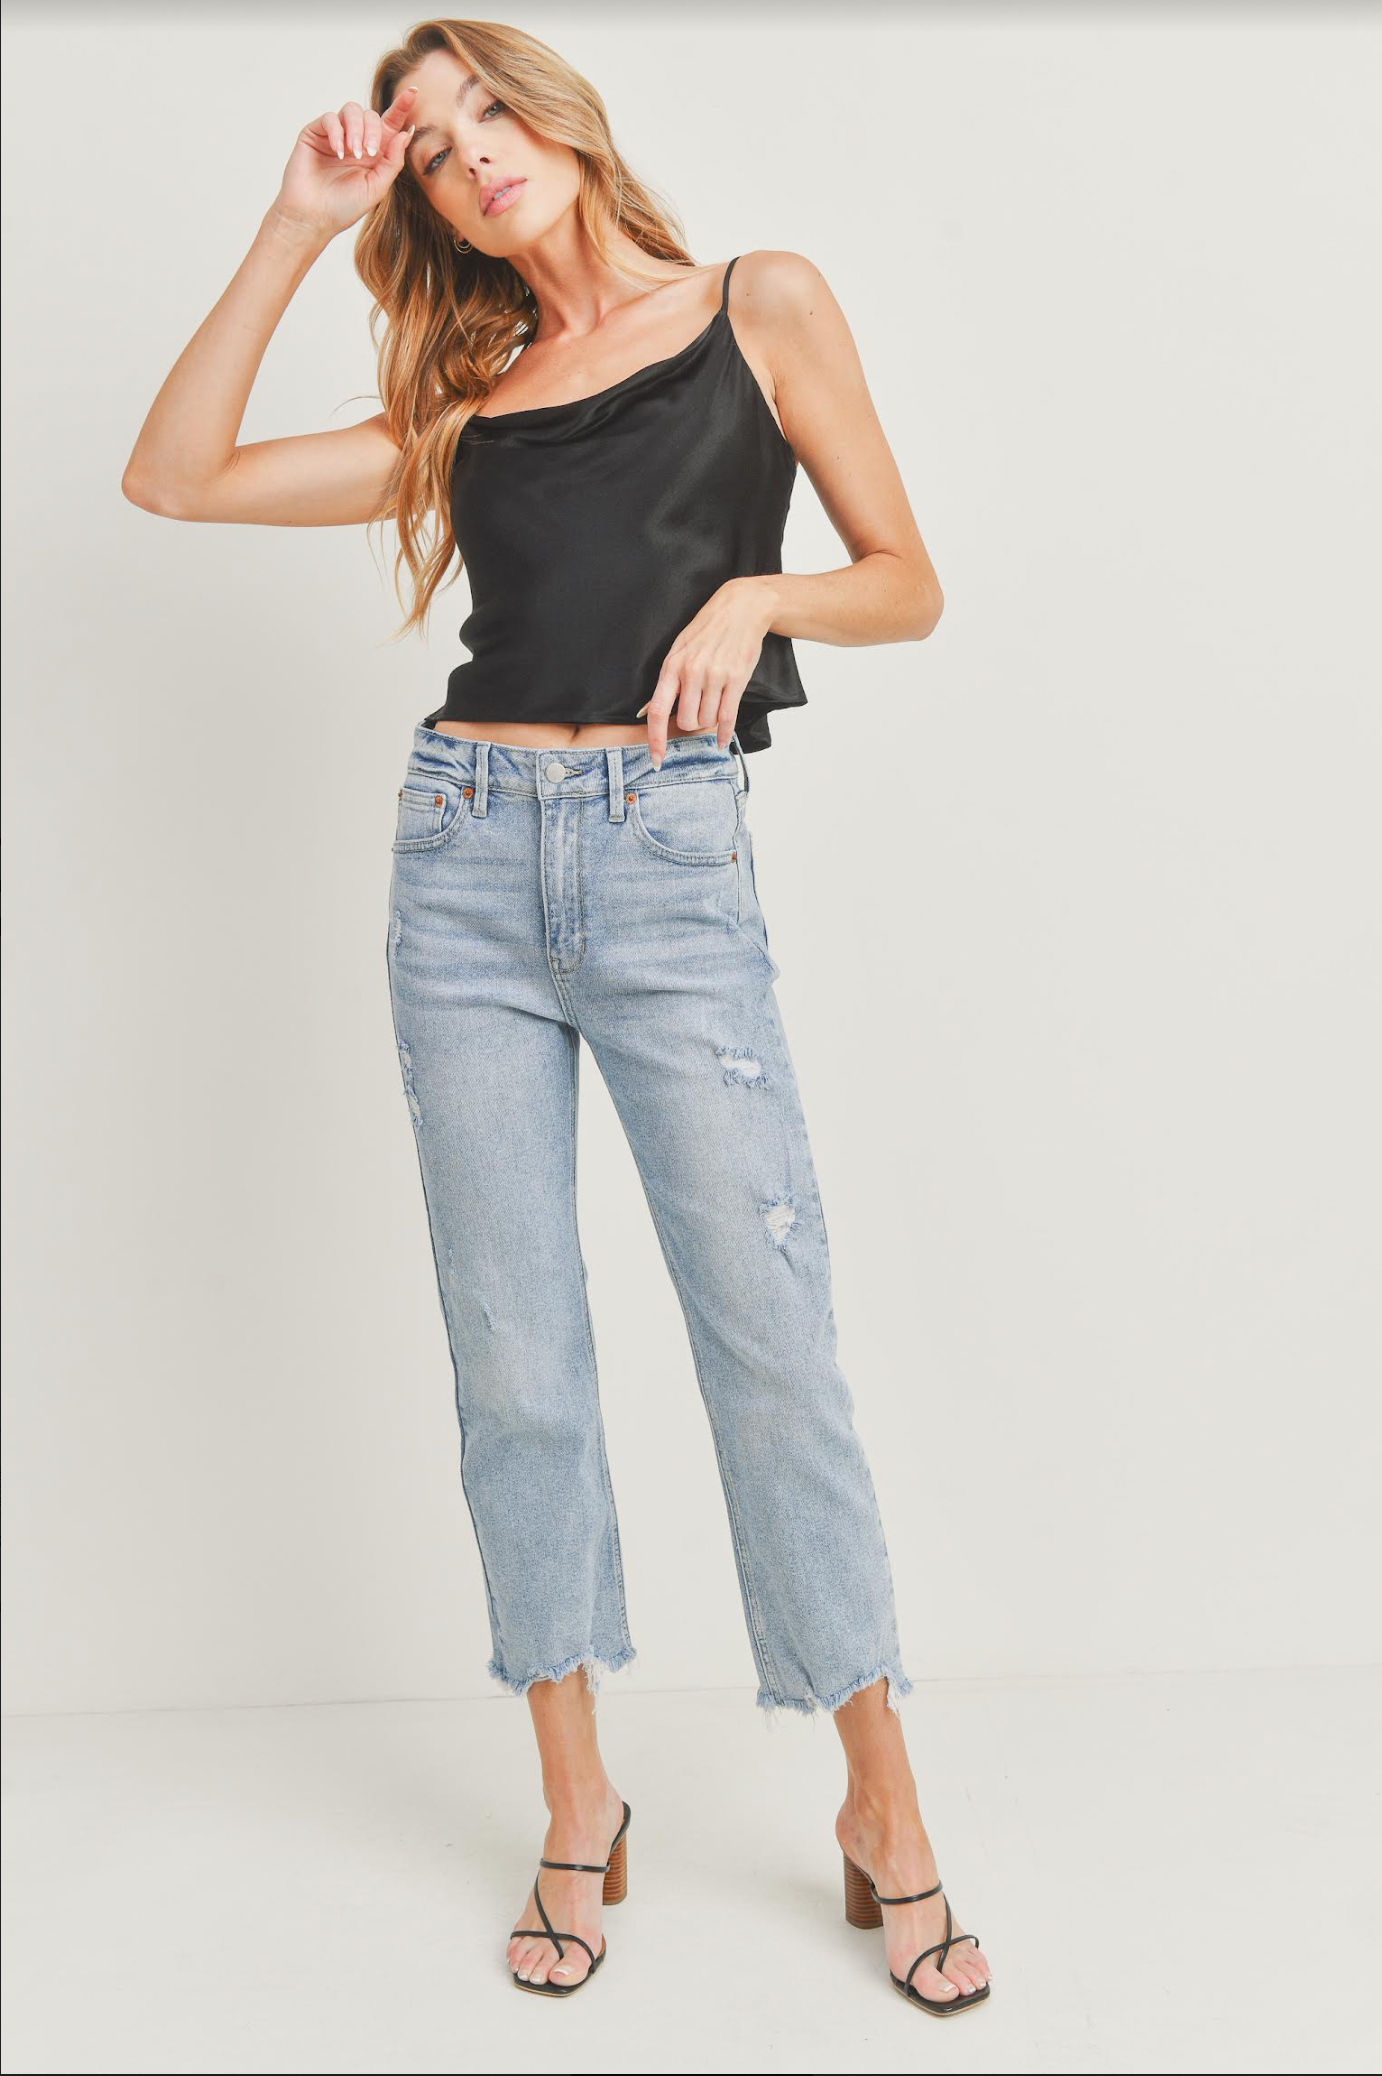 The Busy Woman Jeans